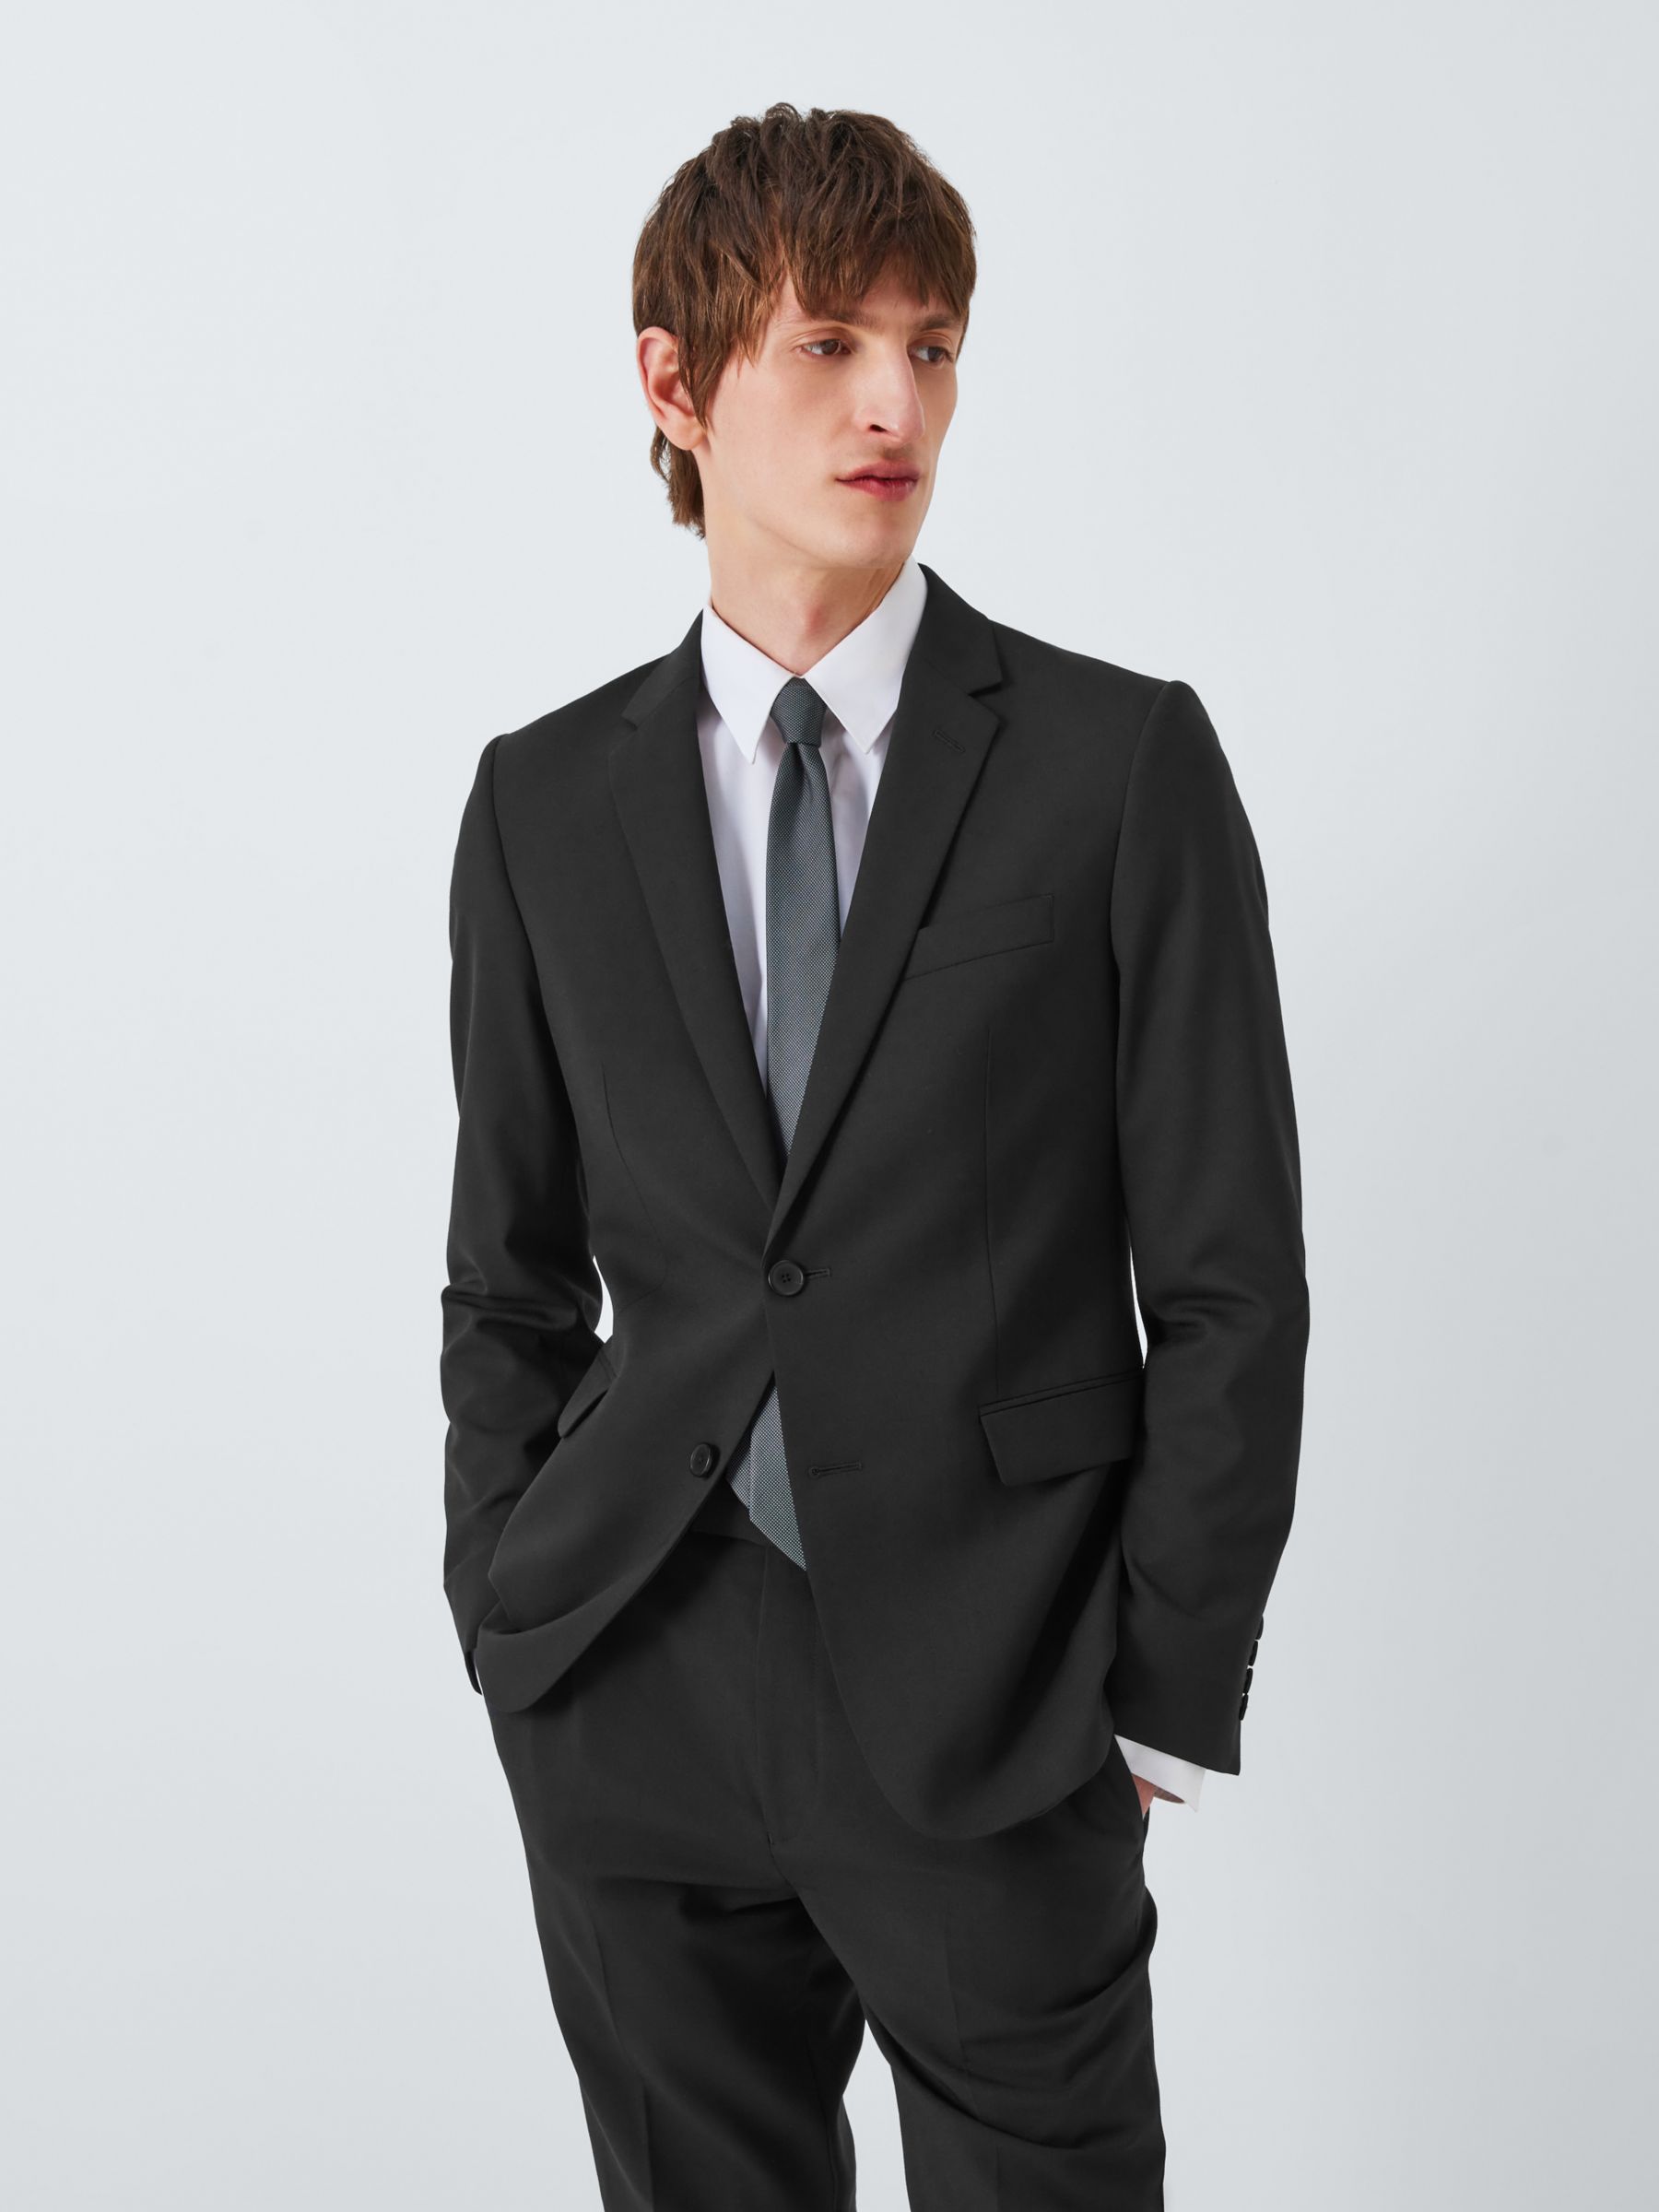 Buy Black Slim Fit Suit by  with Free Shipping